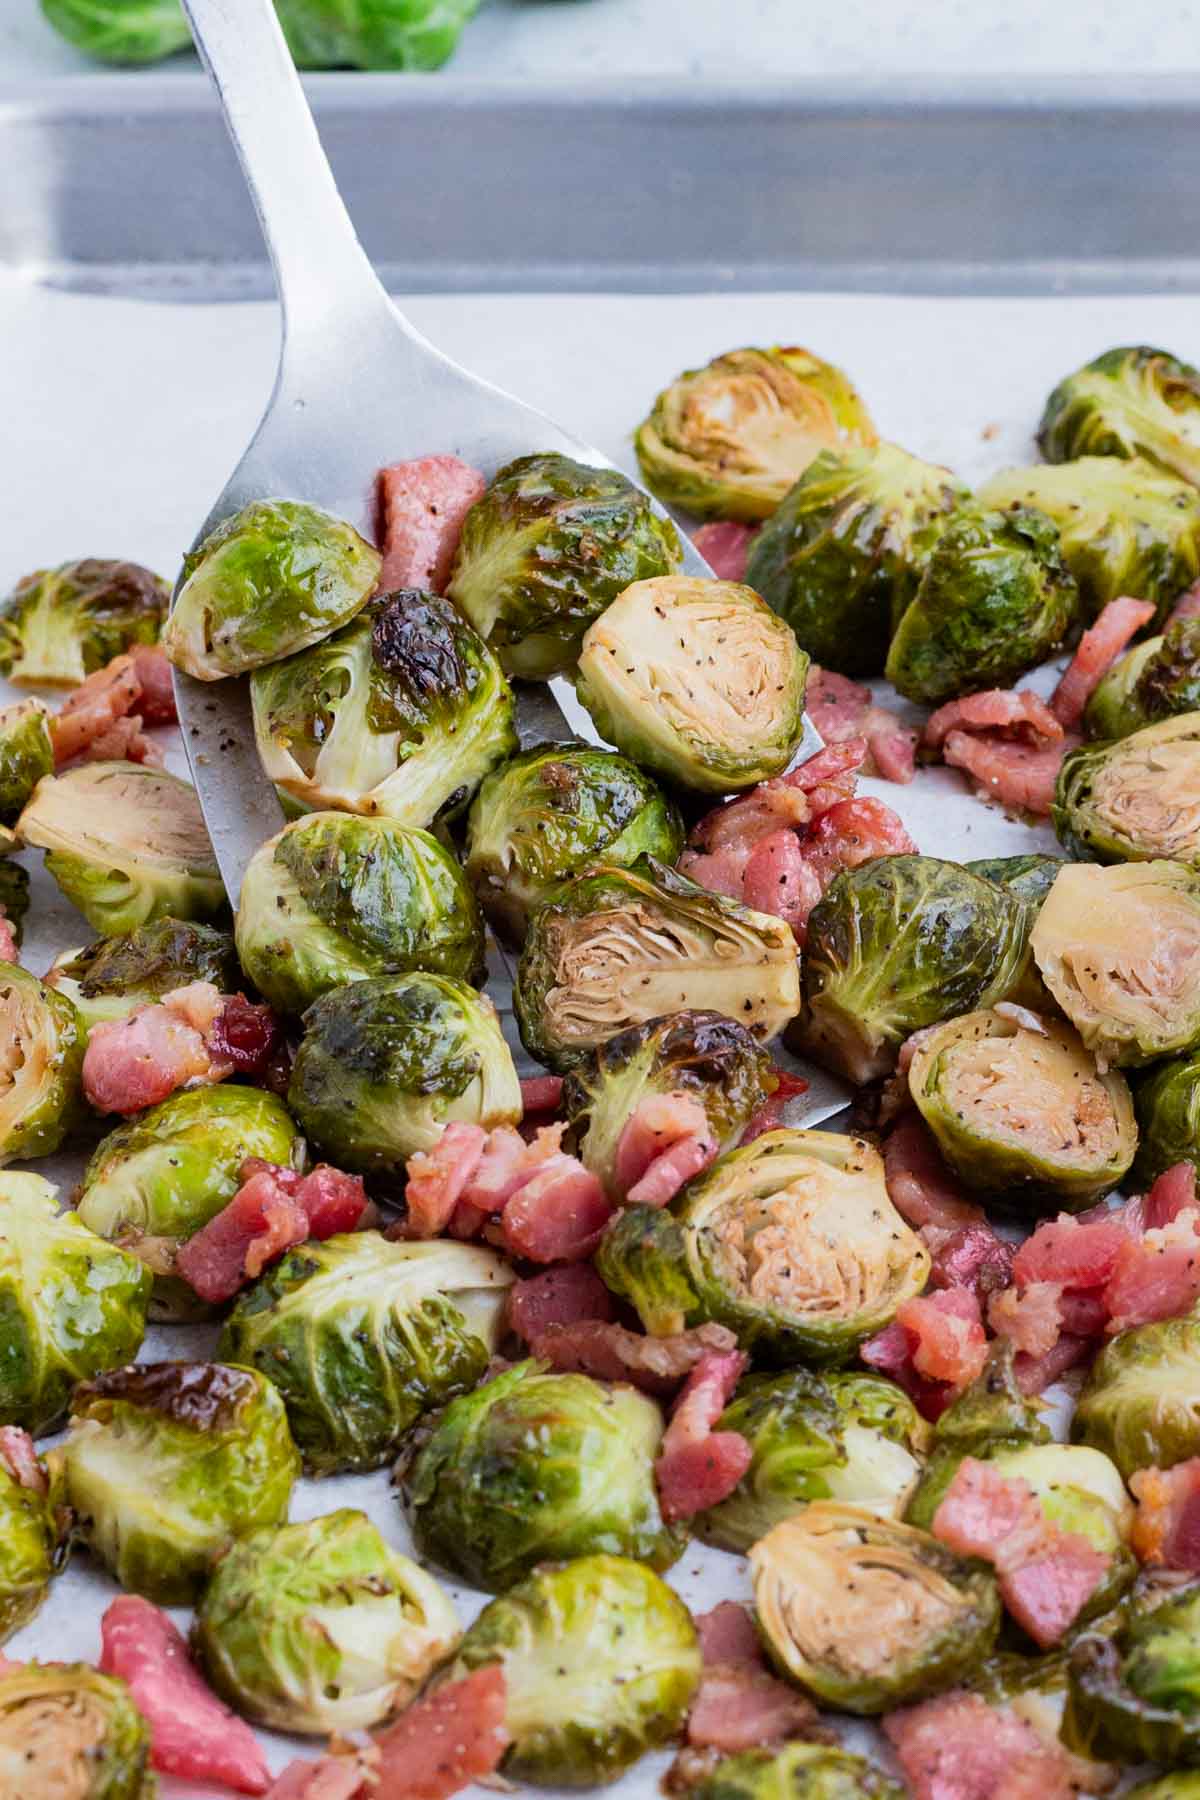 A spatula is used to scoop Brussels sprouts and bacon after roasting in the oven.